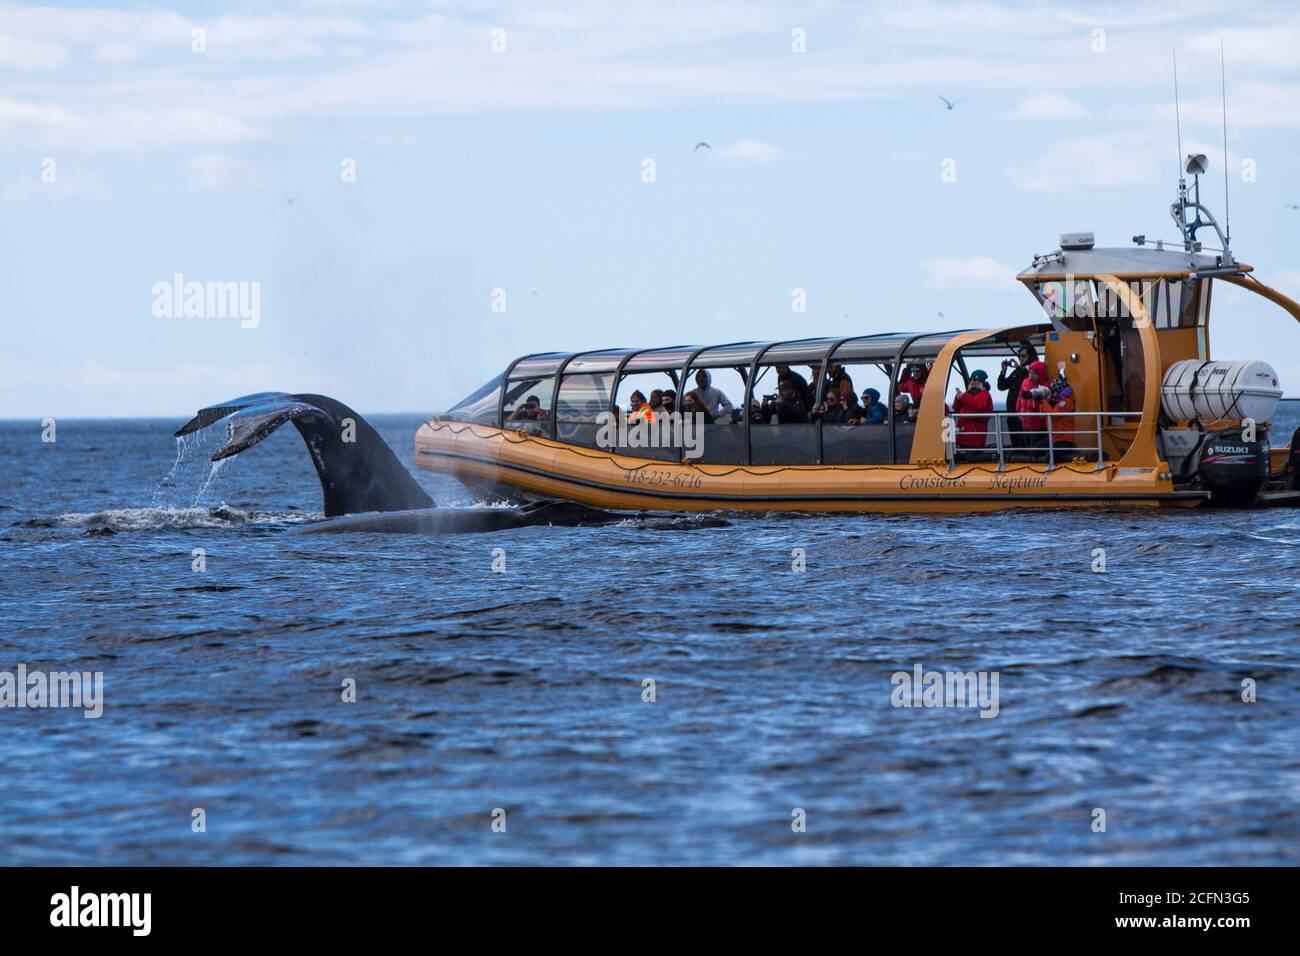 Whale watching on Saint Lawrence river in Tadoussac, Quebec, Canada. Stock Photo